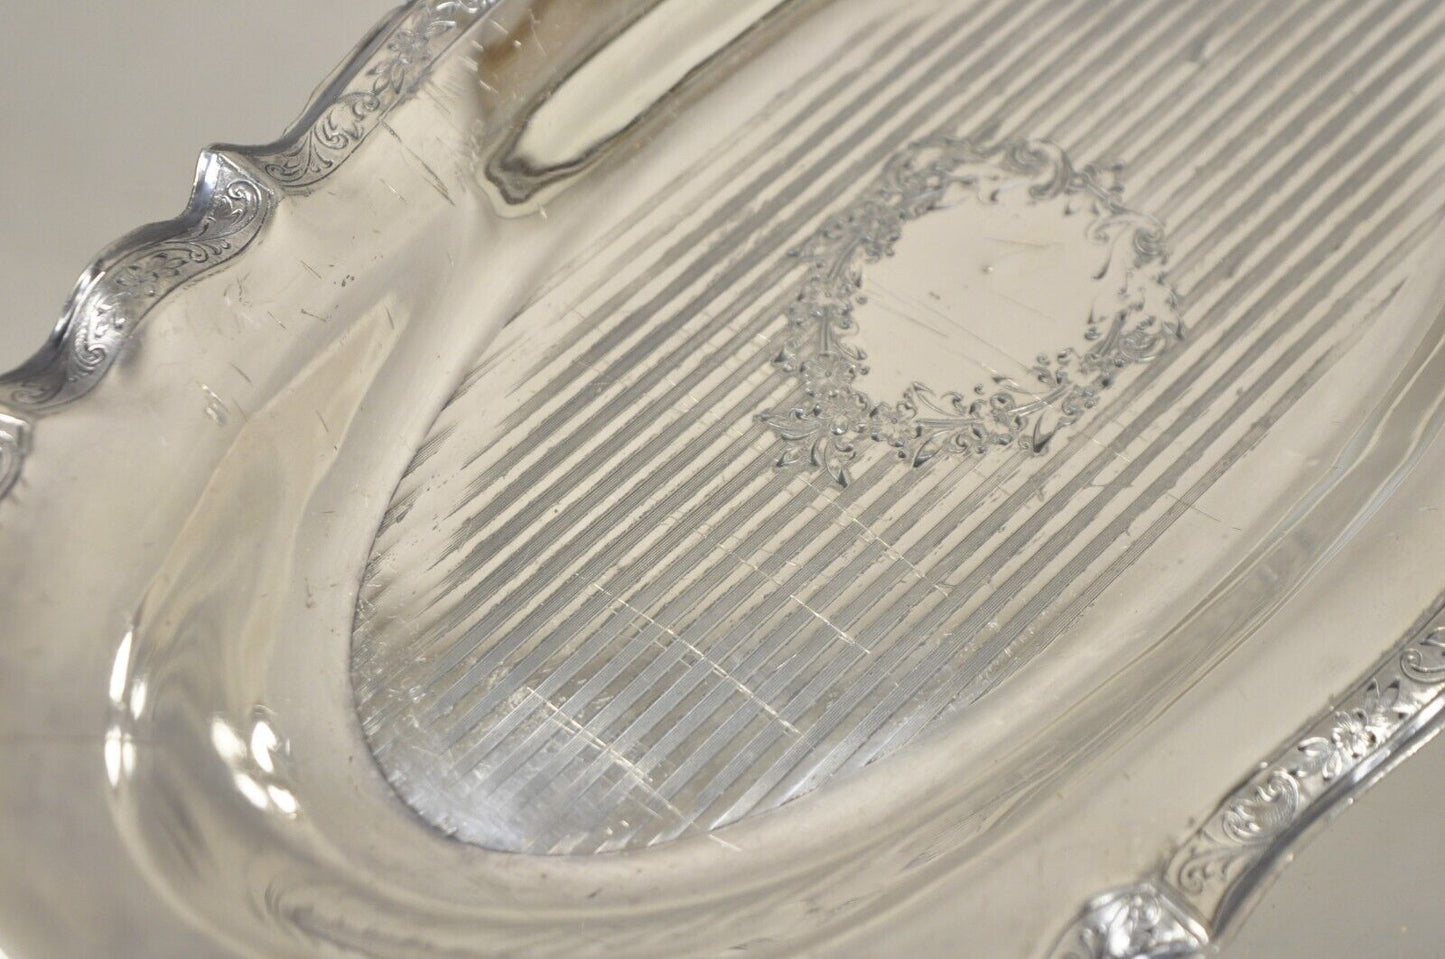 Vintage Art Nouveau Silver Plated Oval Trinket Dish Candy Dish Tray